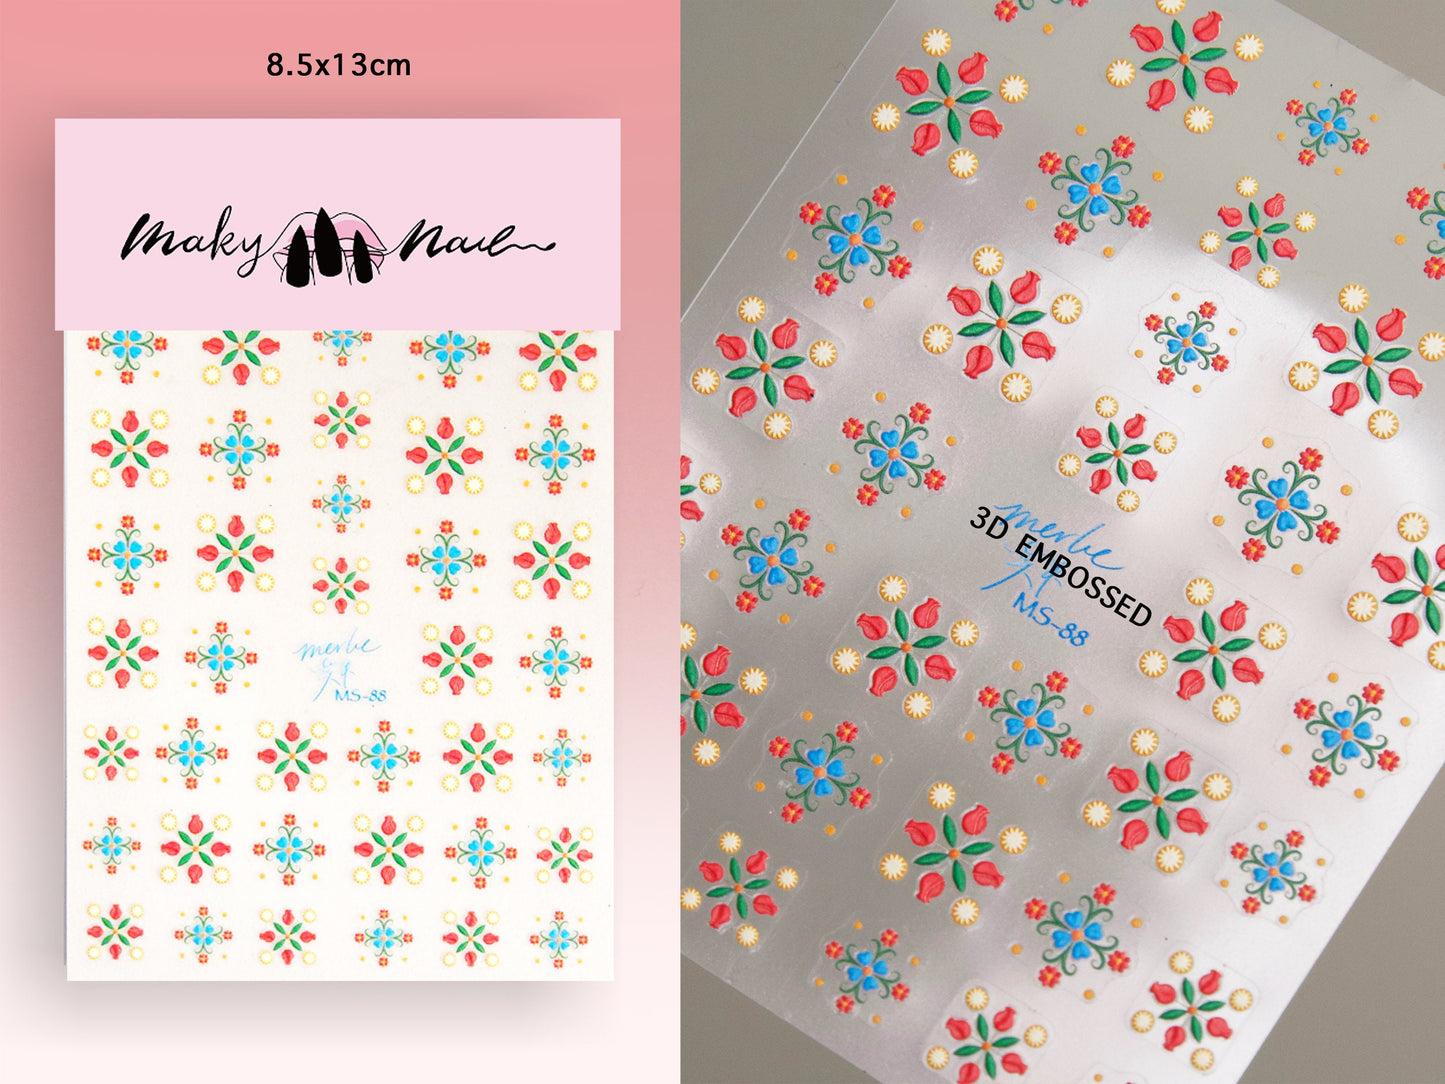 Pottery Floral Ceramics Print nail sticker/ Vintage Tile pattern 3D Nail Art Stickers Self Adhesive Decals/Flower Nail Art Decals